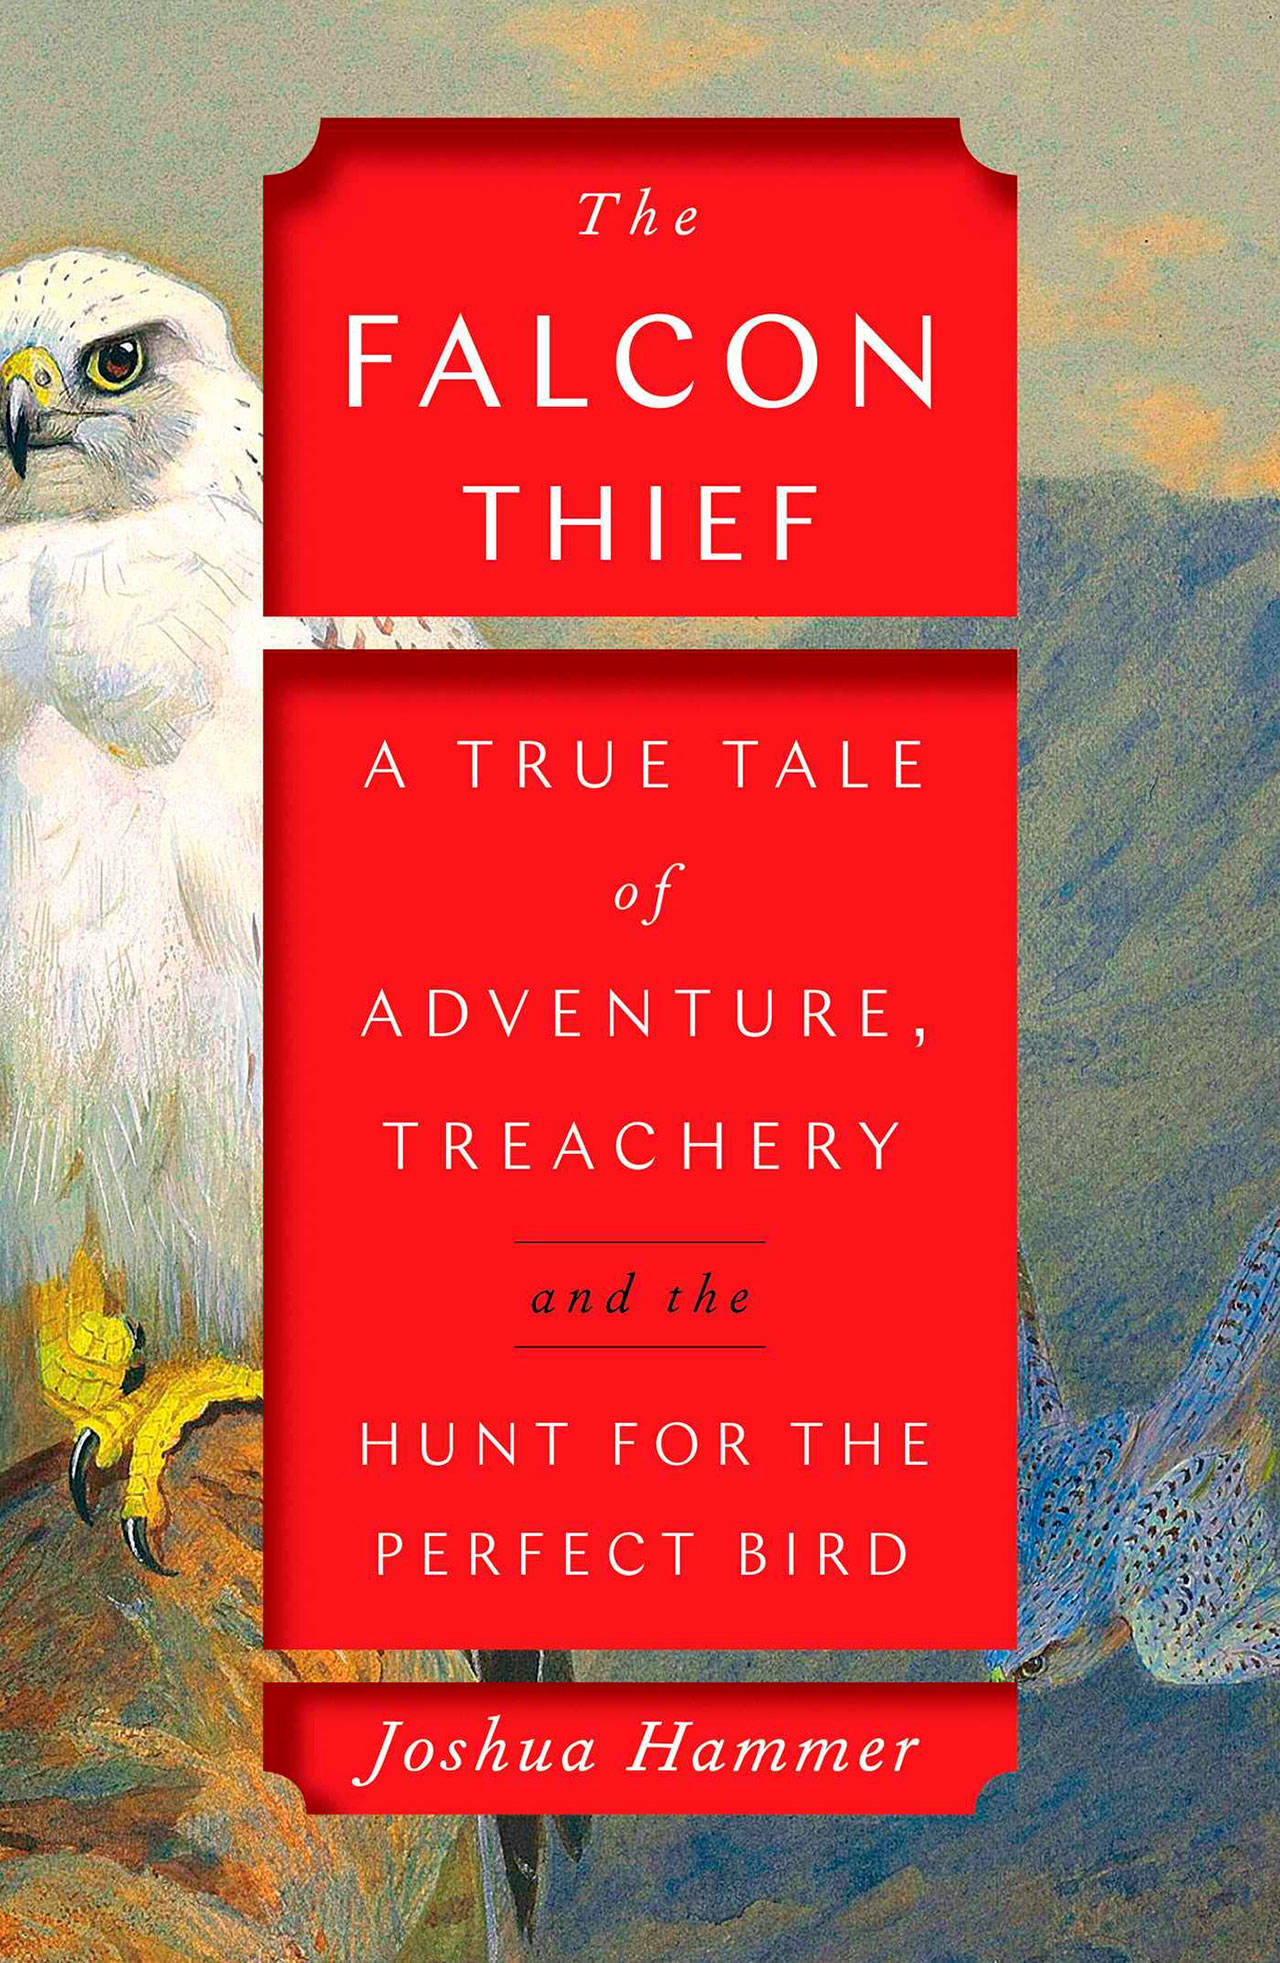 Image courtesy of Eagle Harbor Book Company | Author Joshua Hammer will visit Eagle Harbor Book Company at 3 p.m. Sunday, Feb. 16 to discuss his latest nonfiction saga “The Falcon Thief: A True Tale of Adventure, Treachery, and the Hunt for the Perfect Bird.”